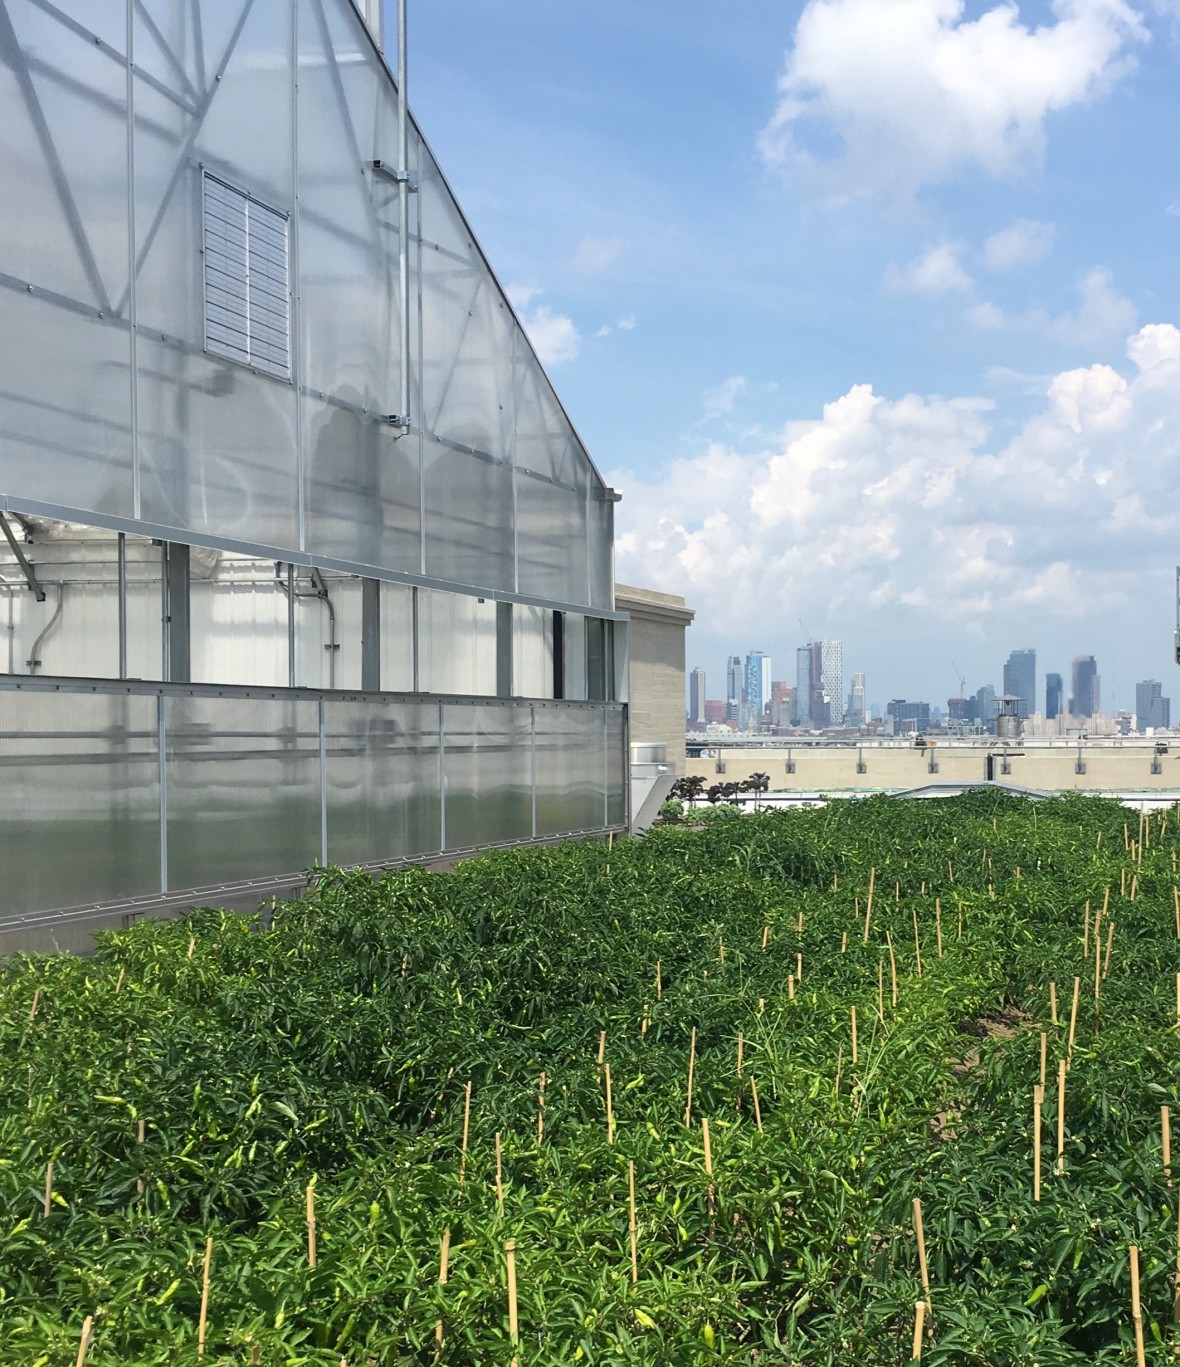 Crops growing next to greenhouse at Brooklyn Grange in Sunset Park with Manhattan skyline in background